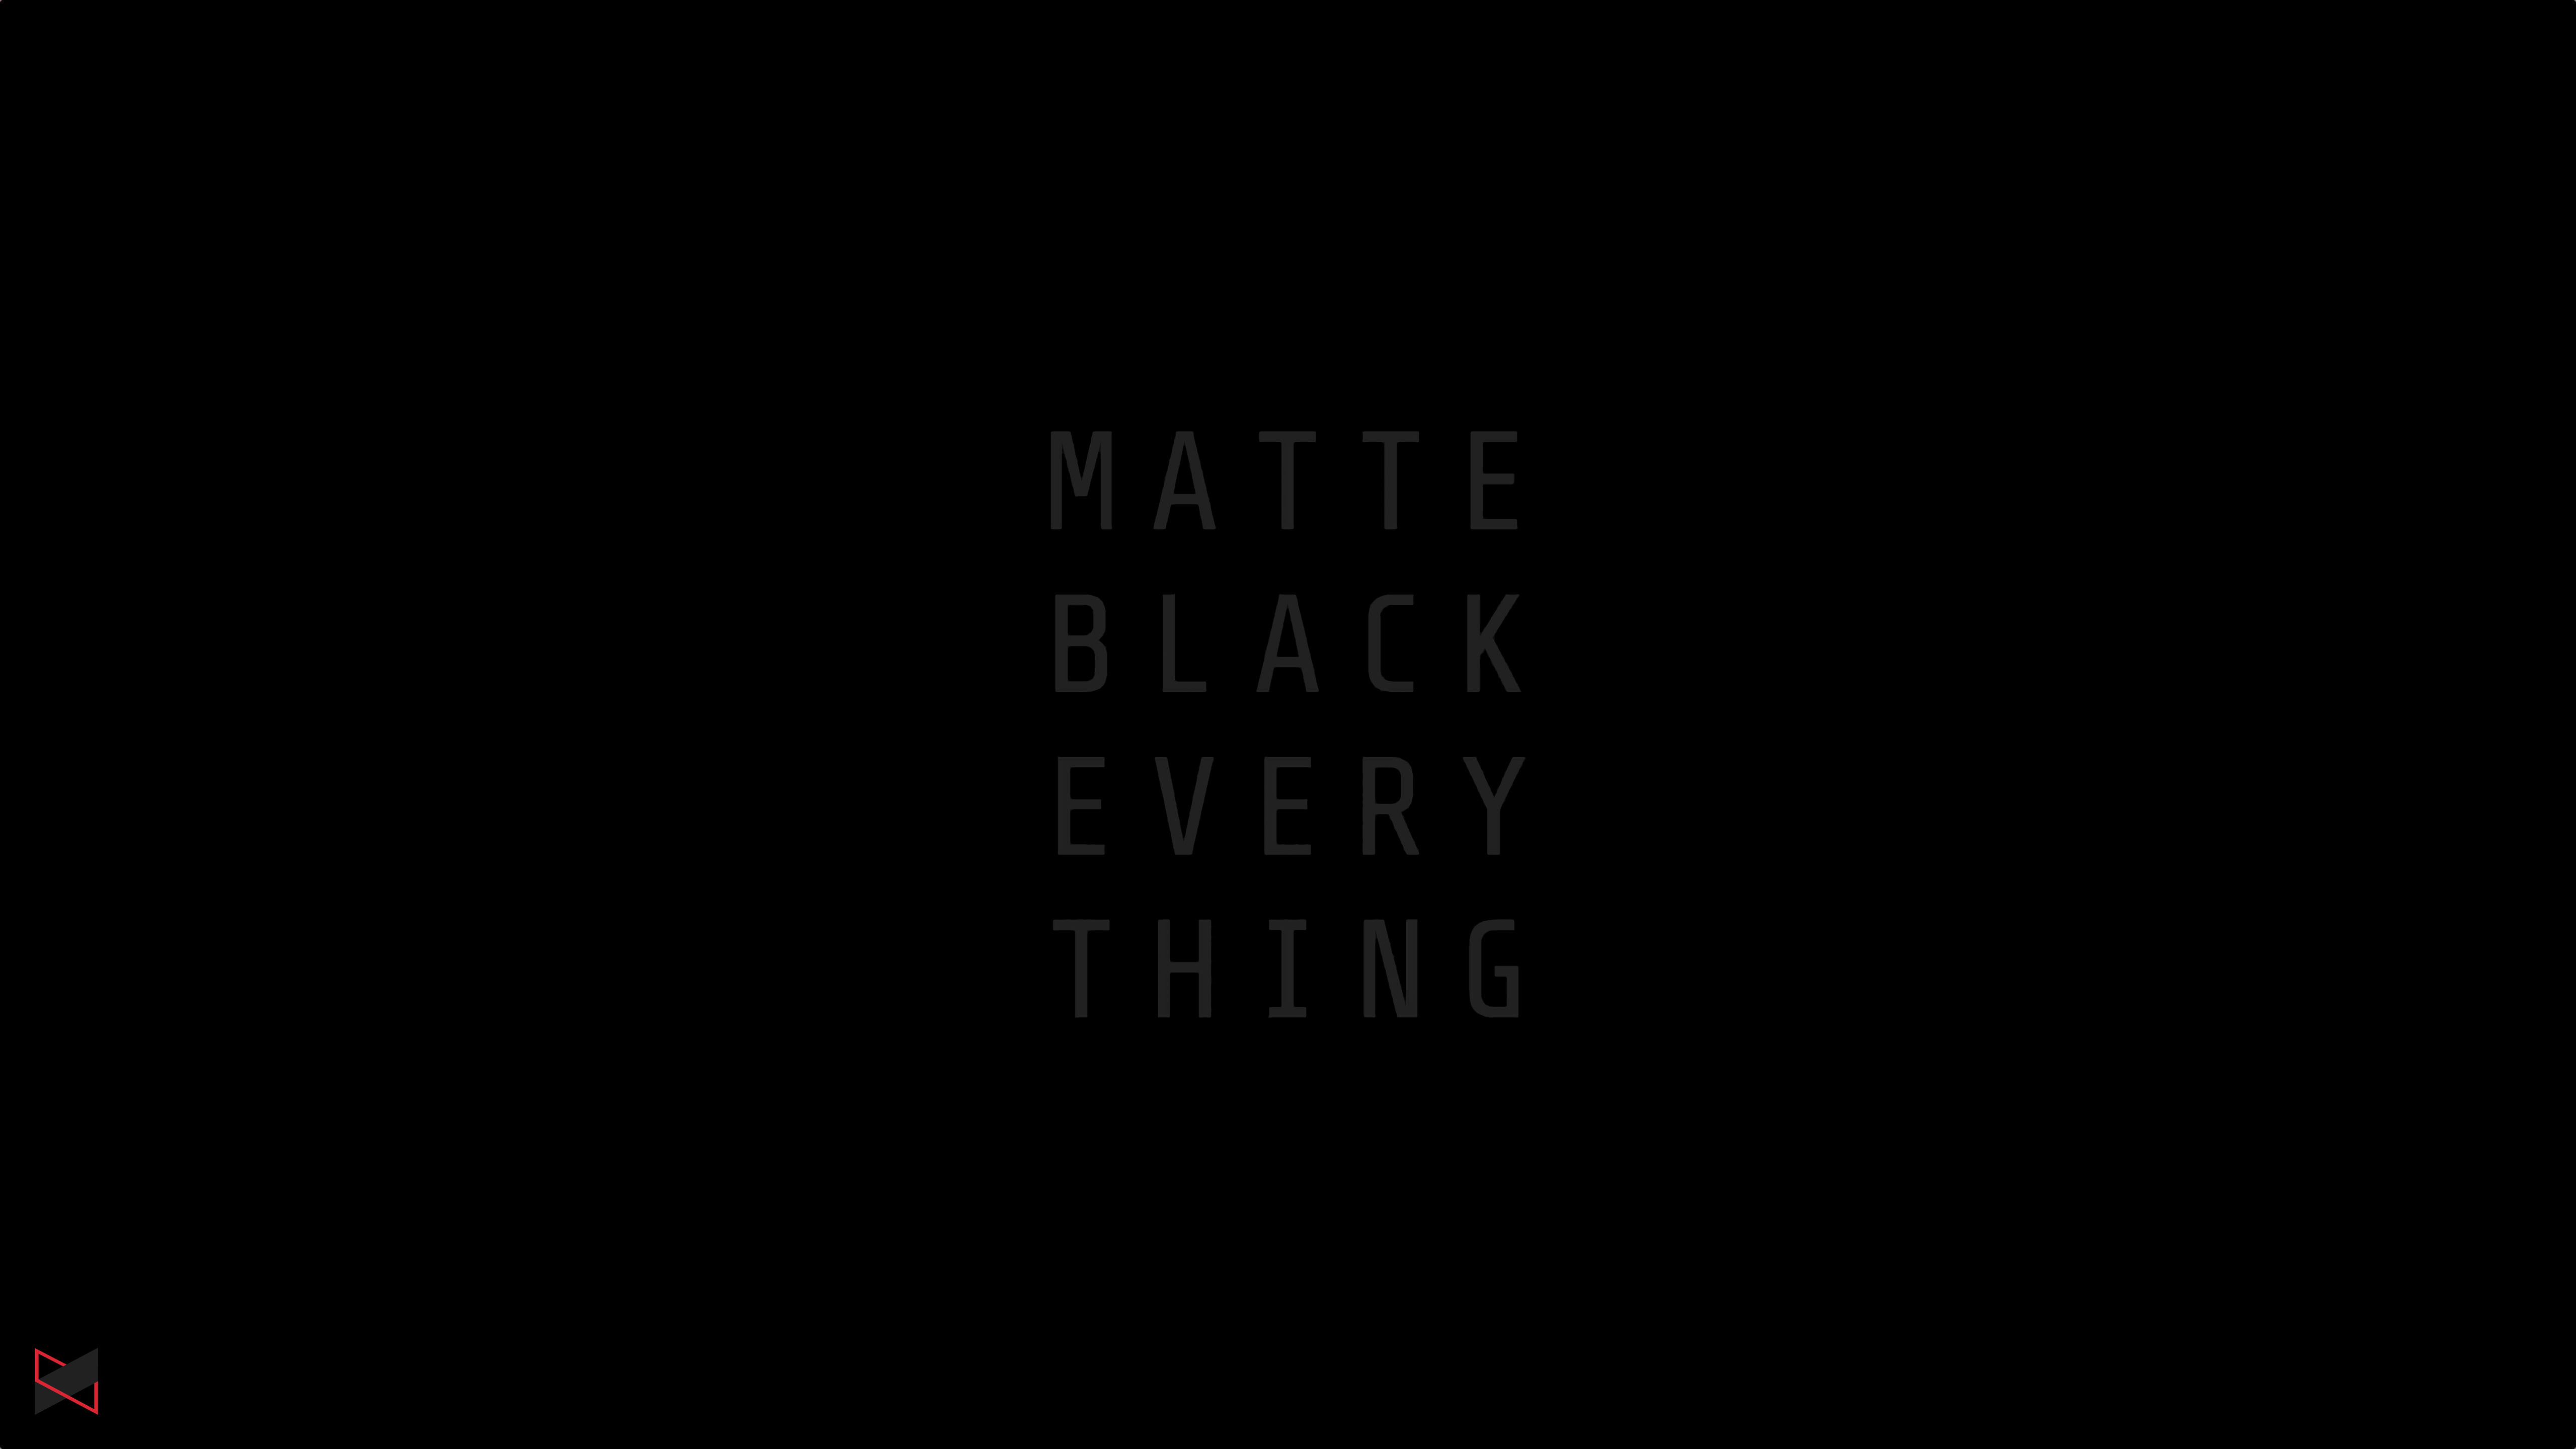 5120x2880 Matte Black Everything Mkbhd 5k Hd 4k Wallpapers Images Backgrounds Photos And Pictures